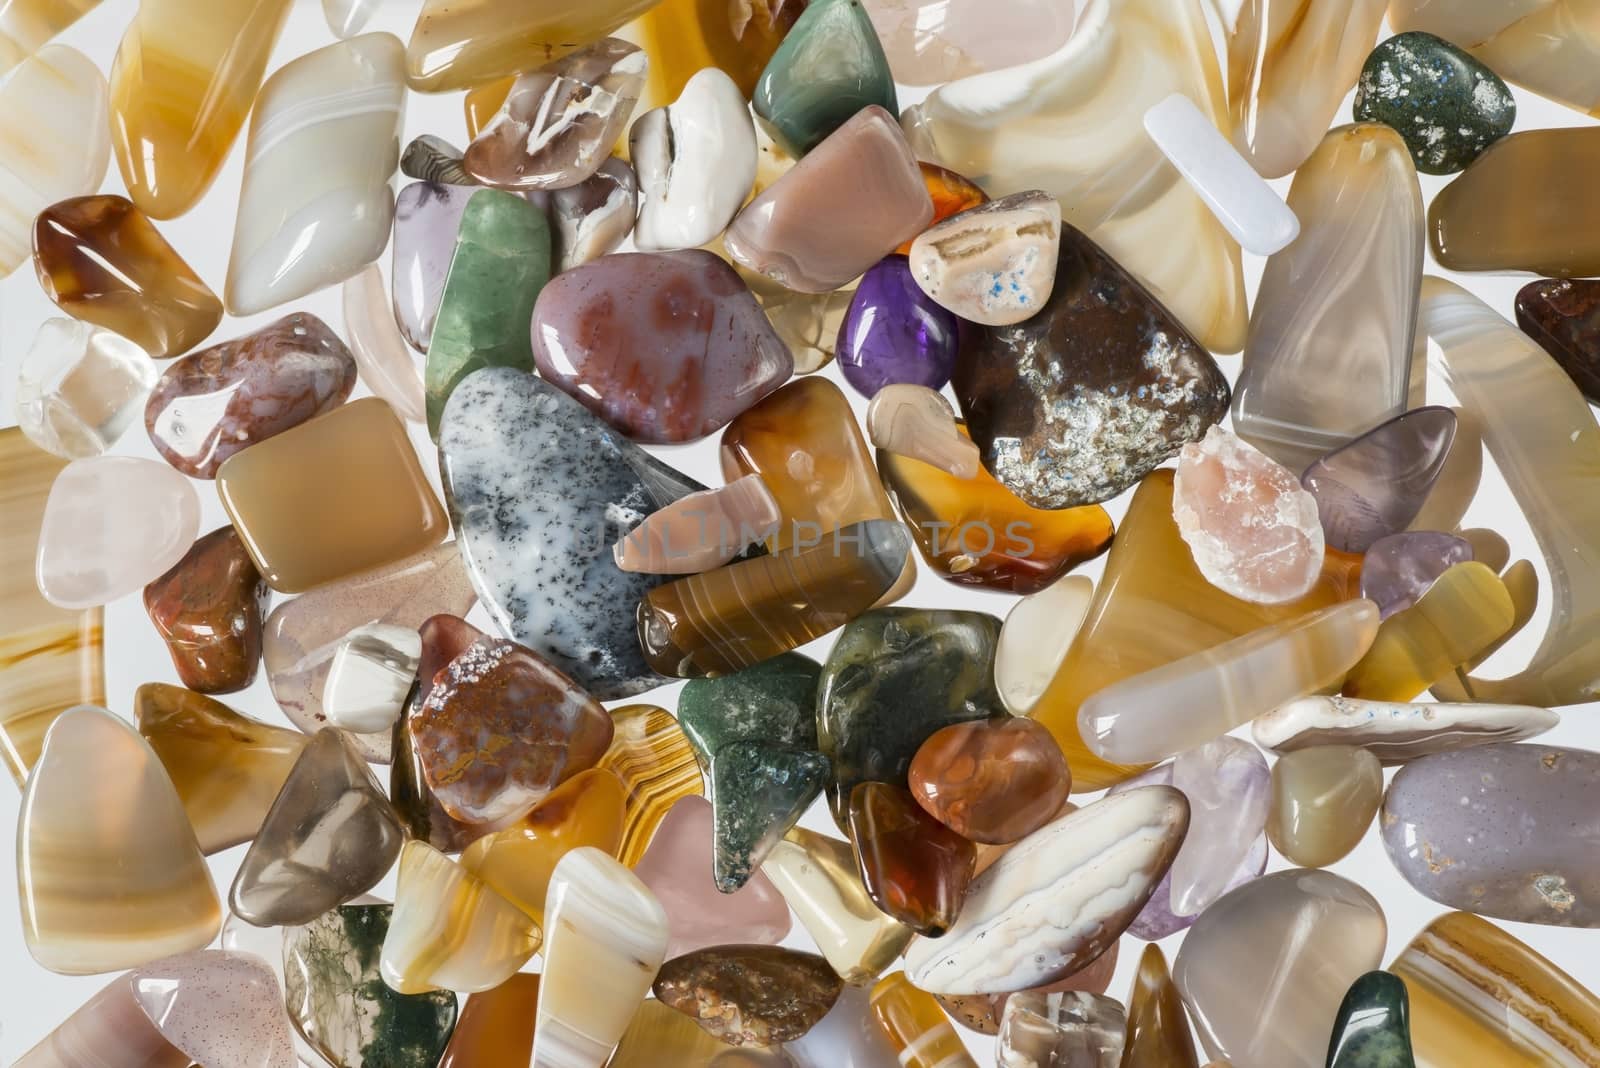 Glassy stones, polished gravel from the river Rhine in the Netherlands